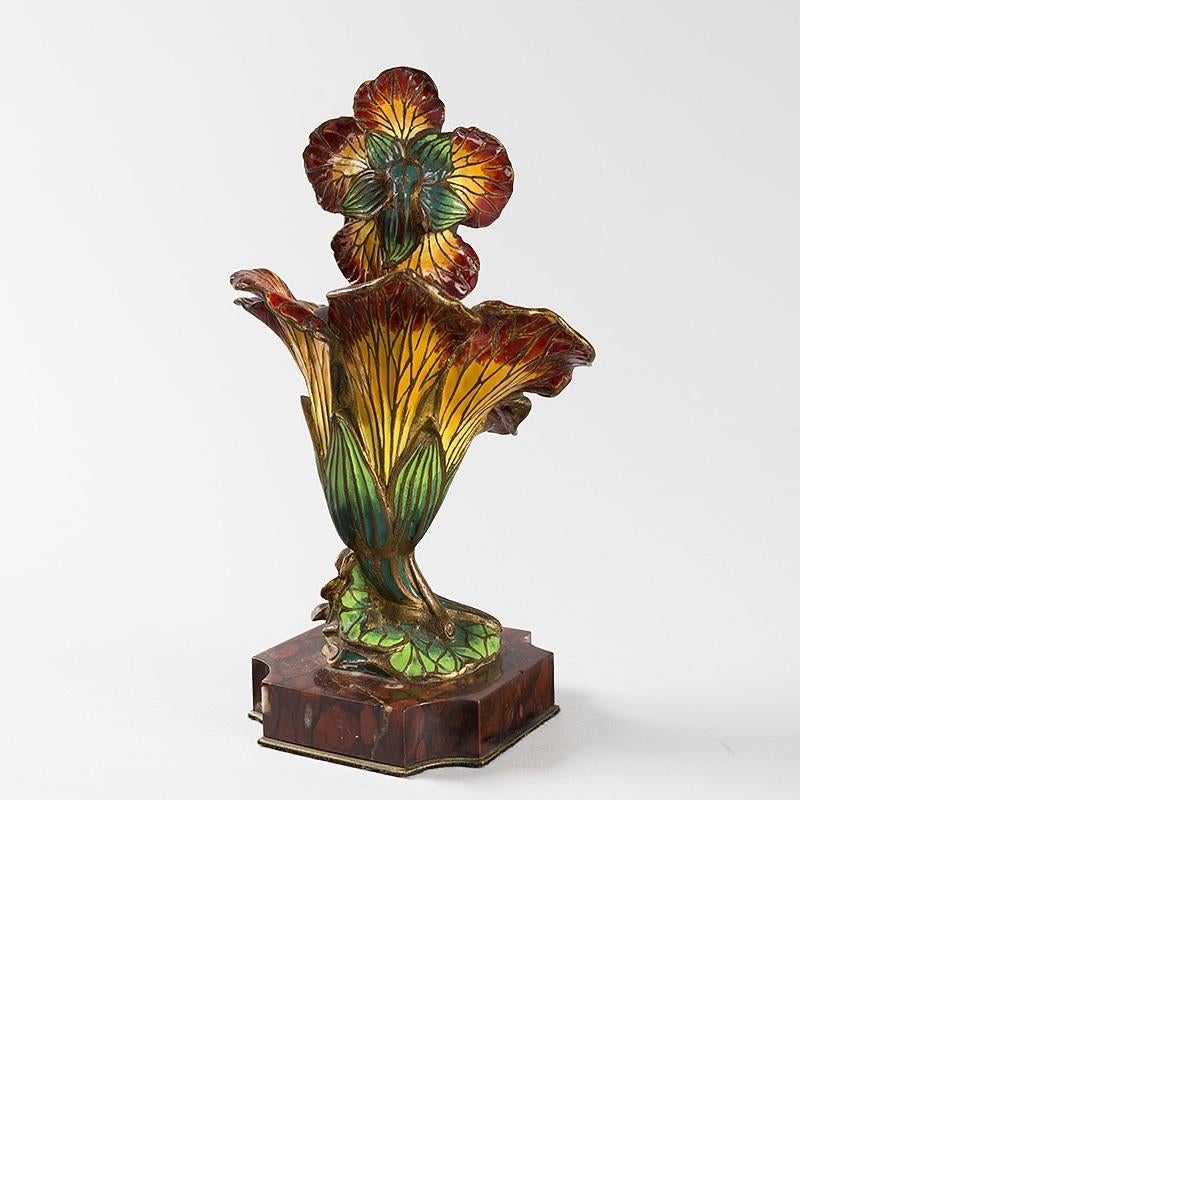 A French Art Nouveau enameled bronze Femme Fleur by Henri Godet (1863-1937).  The sculpture depicts the patinated bronze head and neck of a young woman growing out of an enameled red and yellow lily flower. It rests on a red marble base, with the